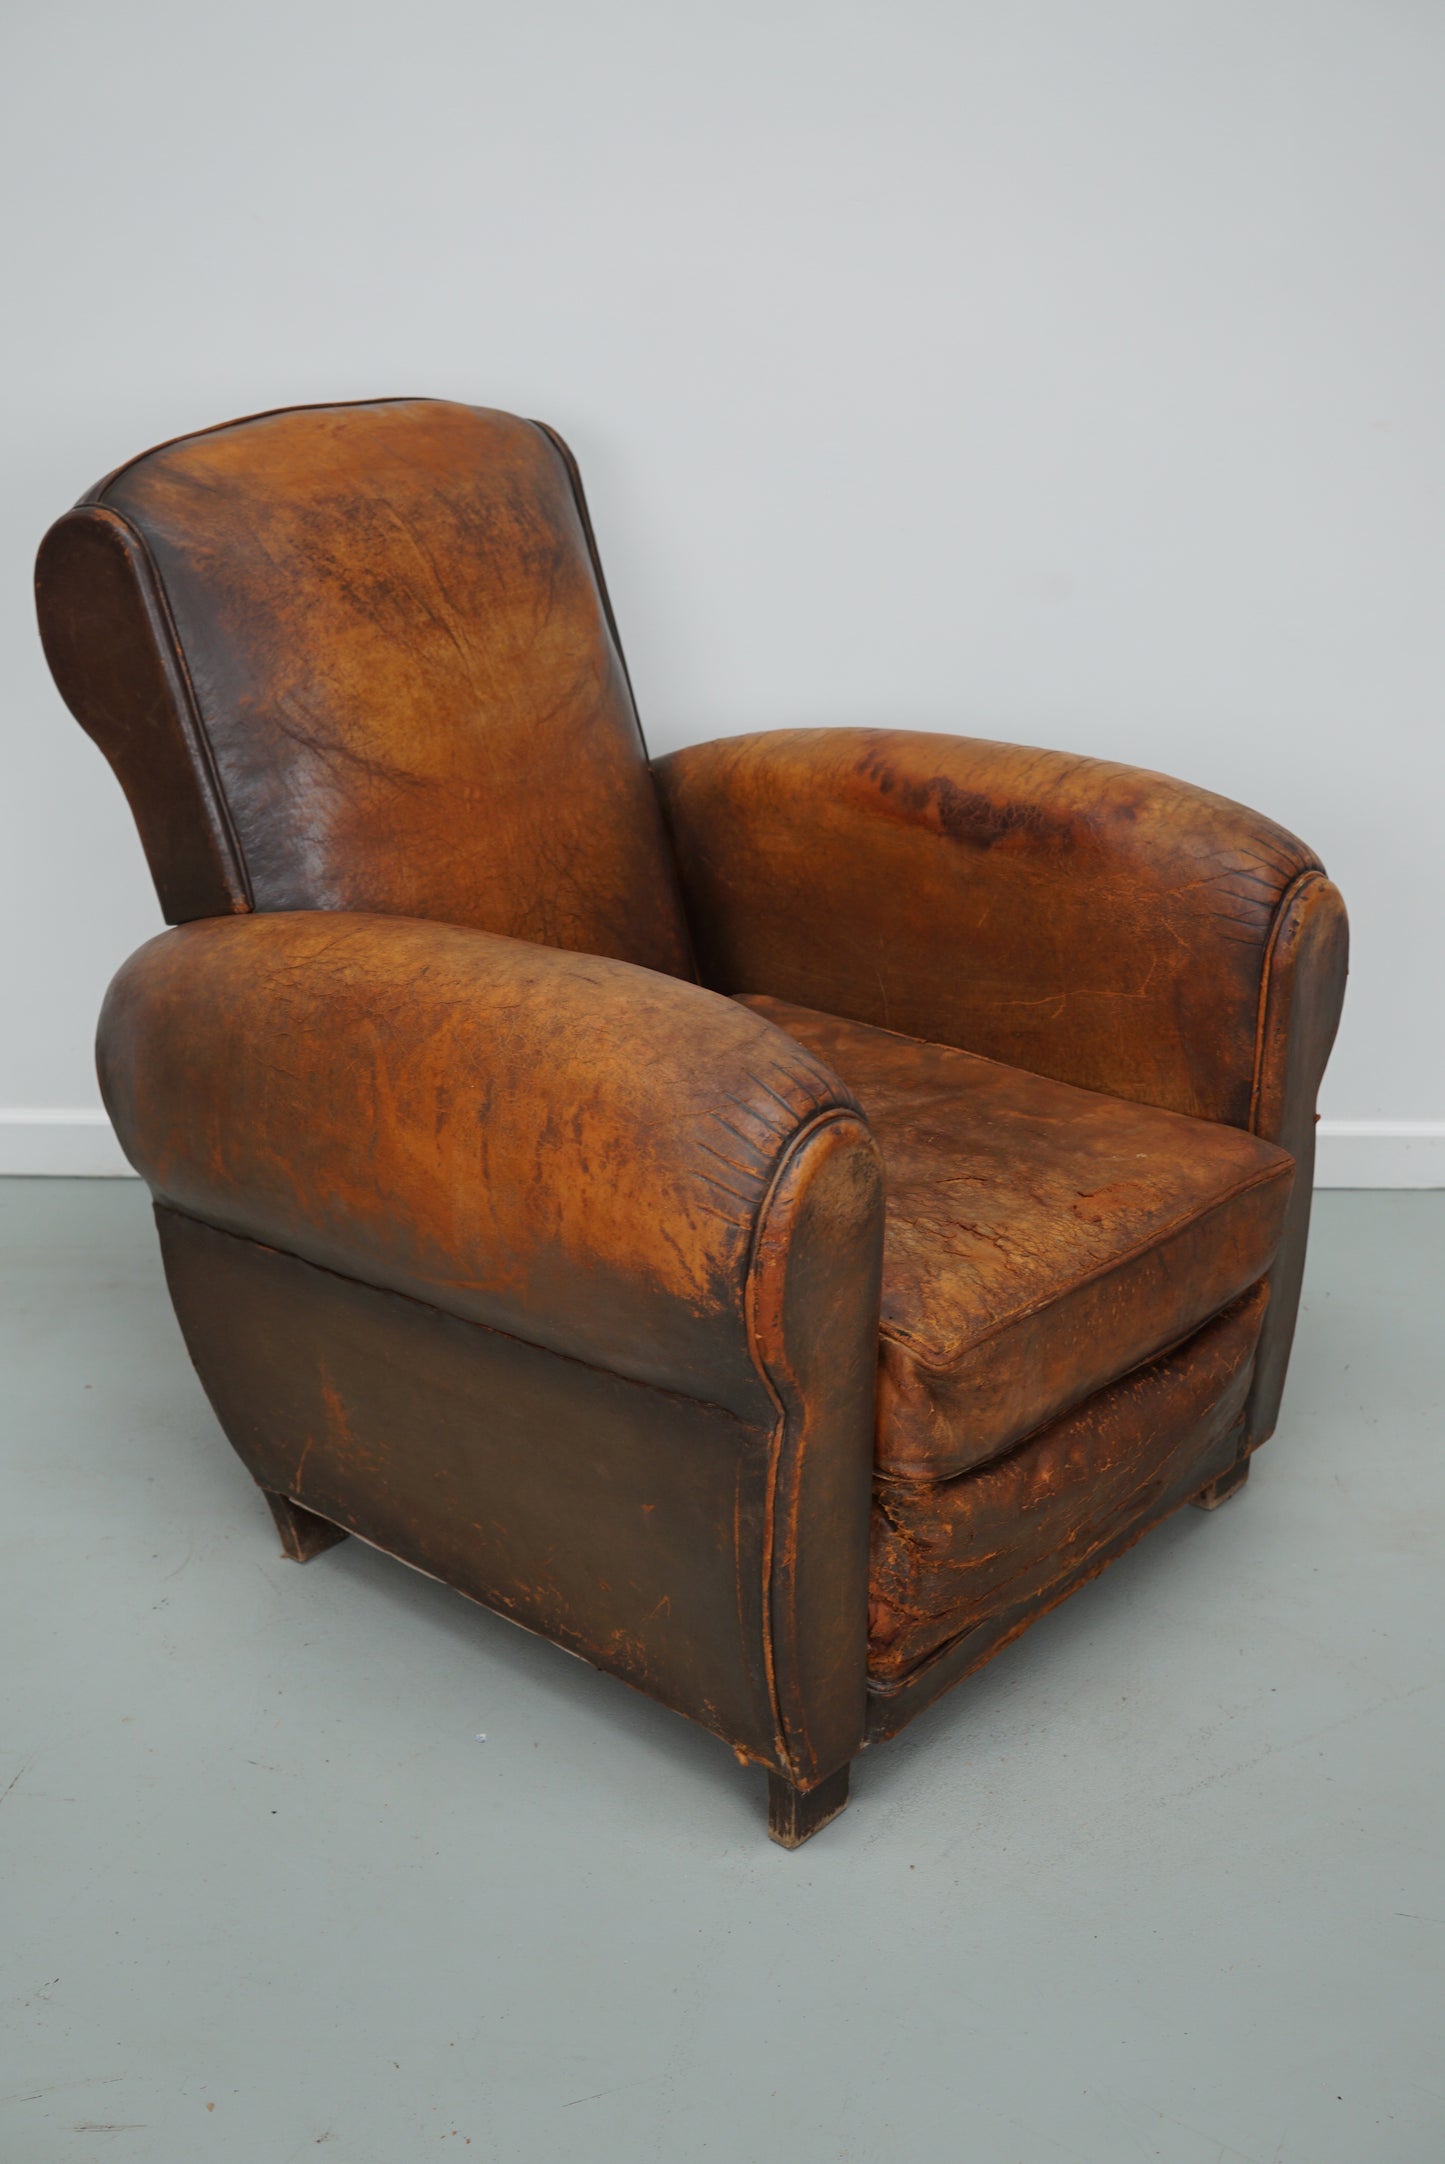 Vintage French Elephant Back Cognac-Colored Leather Club Chair, 1940s